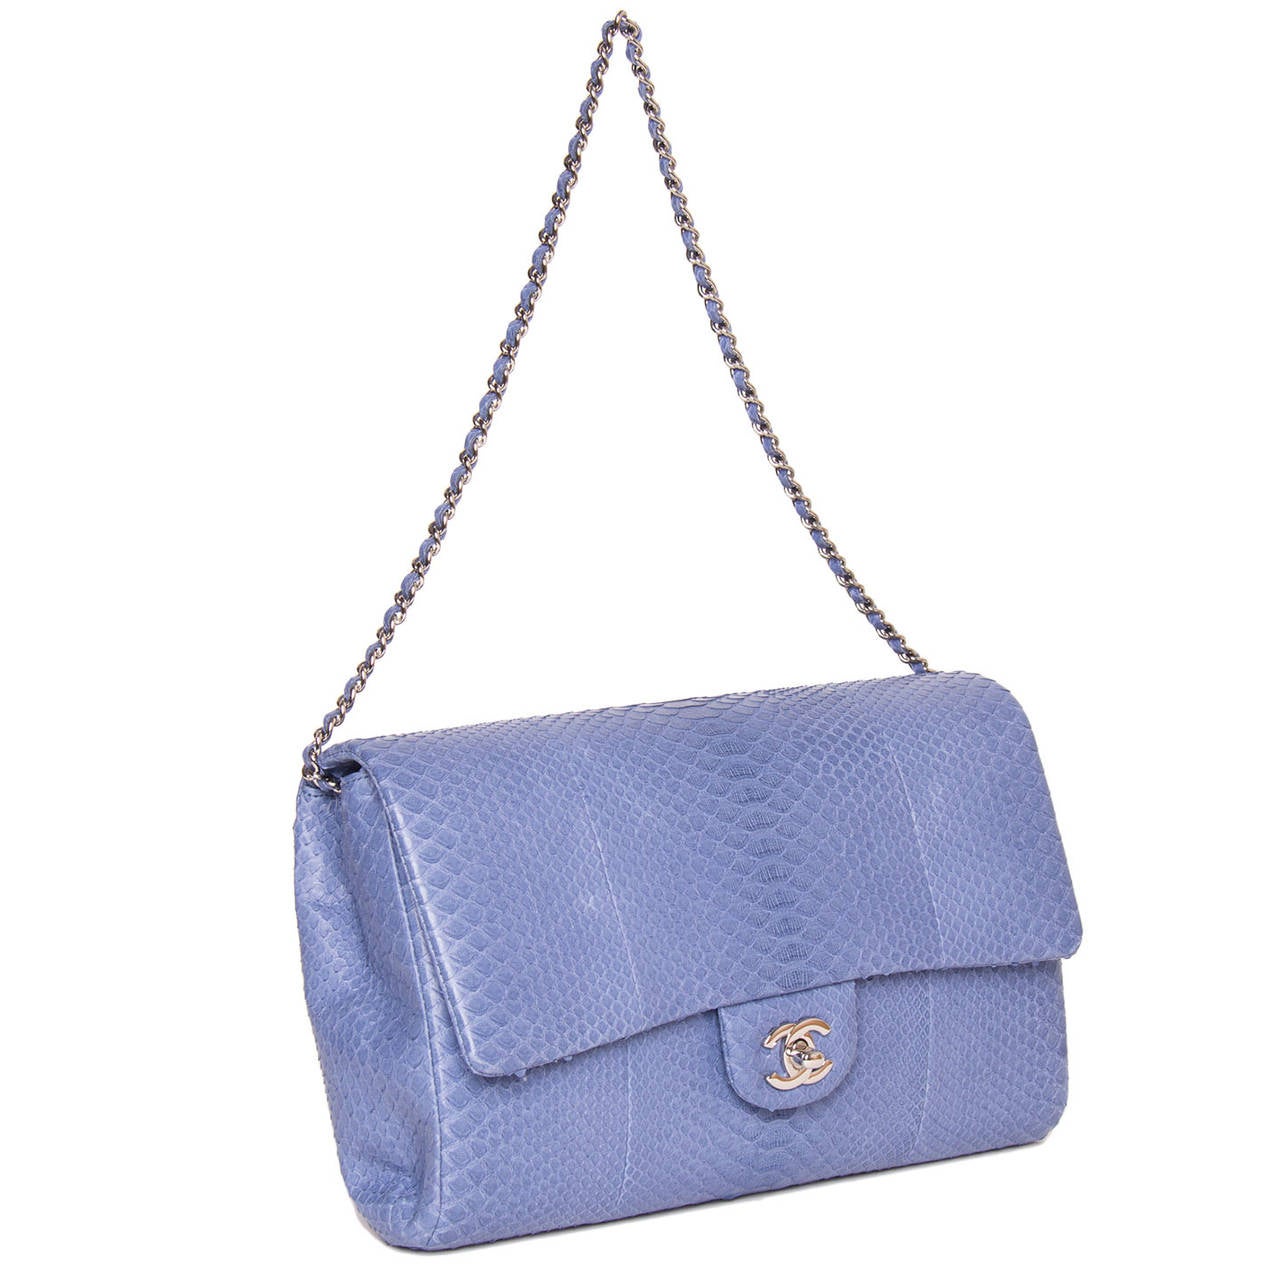 Periwinkle color python clutch with thin silver chain & leather detail strap. The chain and the front logo are made of silver. Inclusive of all original papers and box. Carte d'authenticite 17913925. Made in France.
Size : H 7" L 10" W